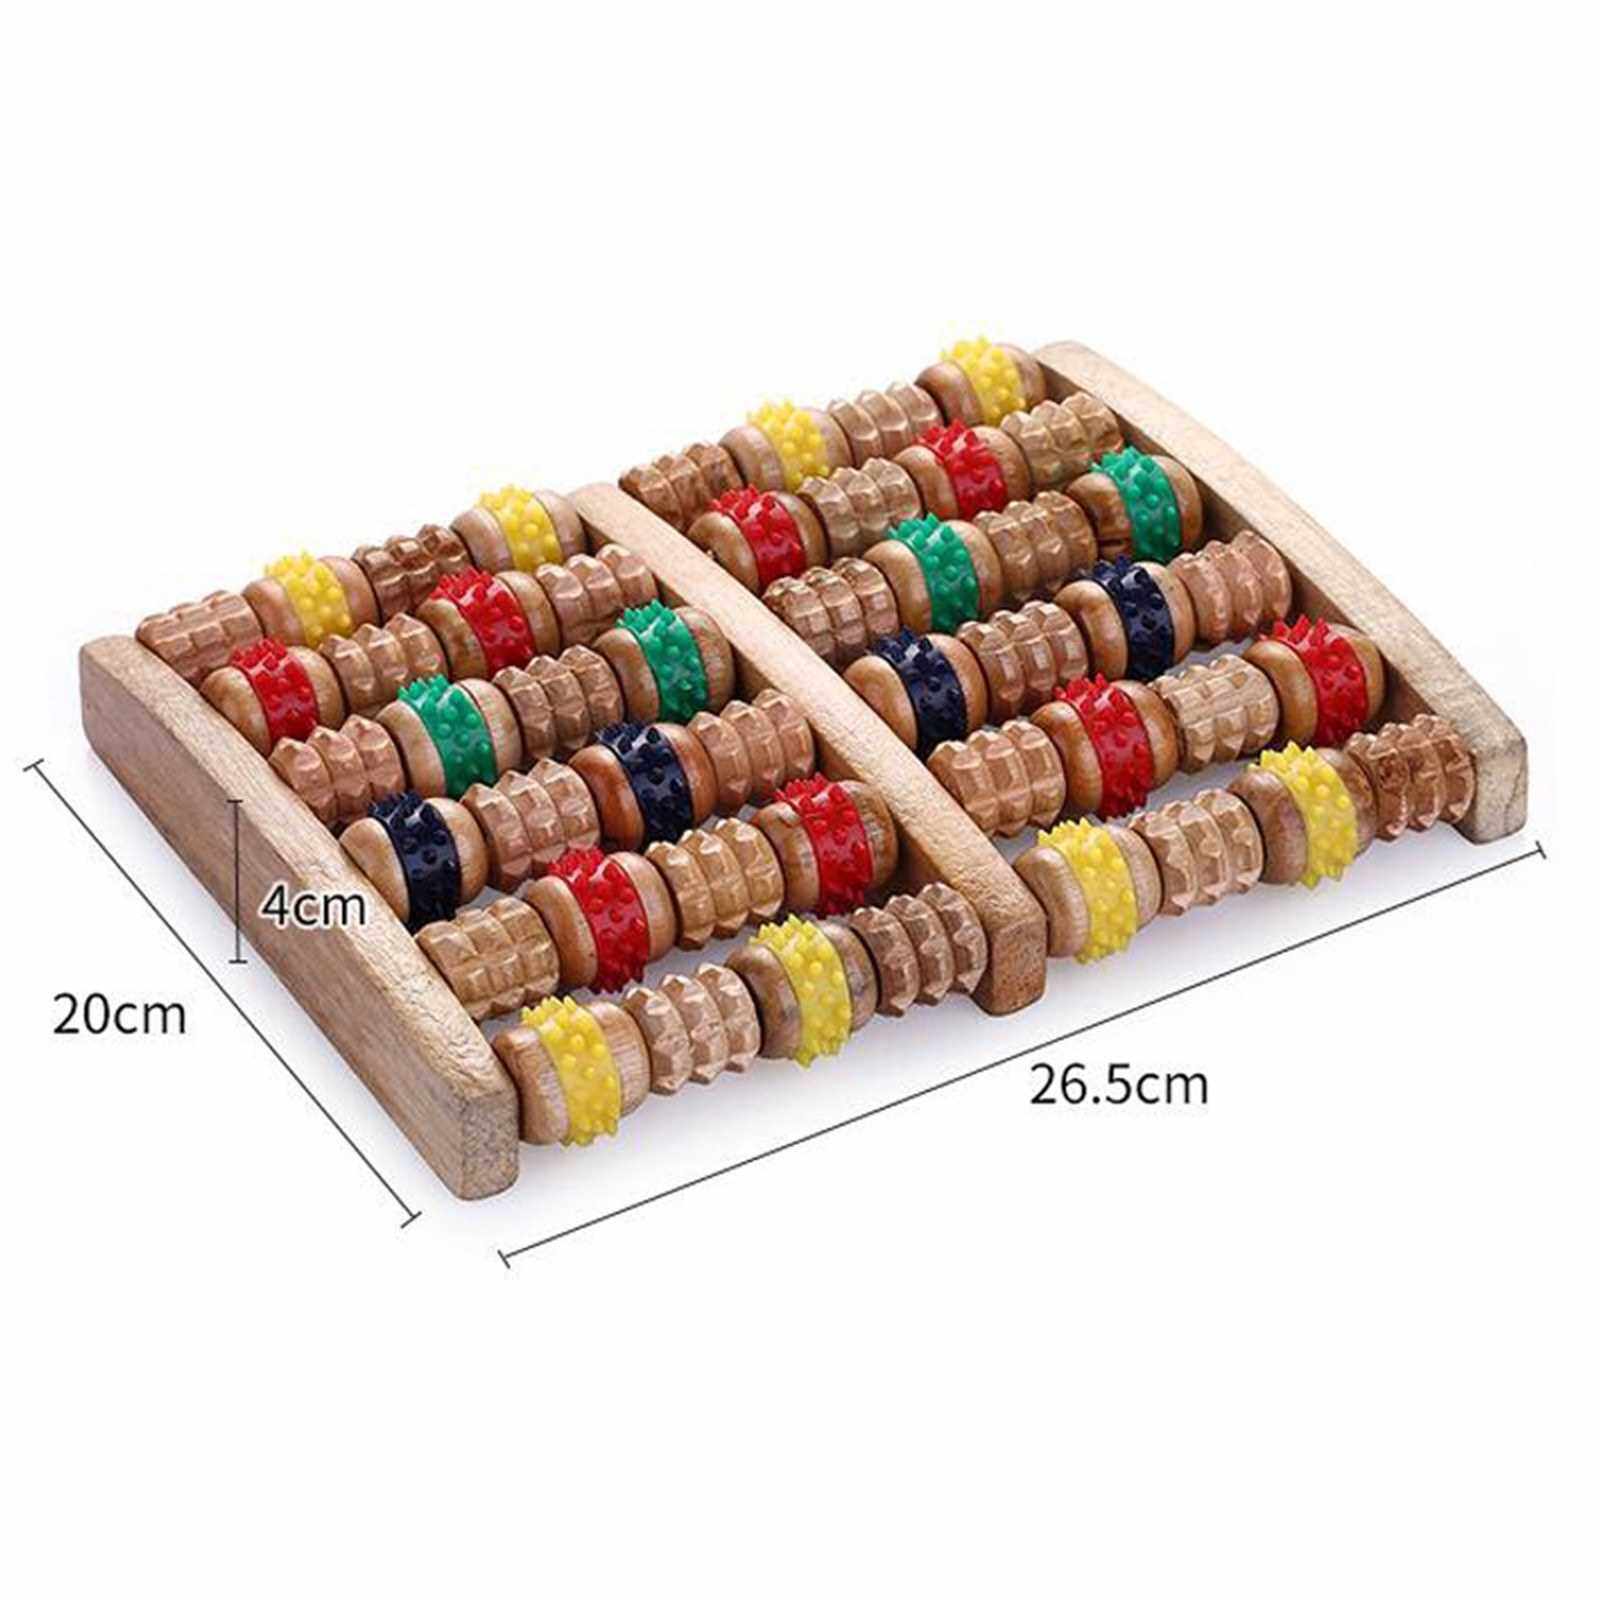 6 Rows Large Wooden Dual Foot Massager Roller Blood Circulation Care Tool for Plantar Fasciitis Heel Foot Arch Muscle Pain Relief Stress Relief (Standard)